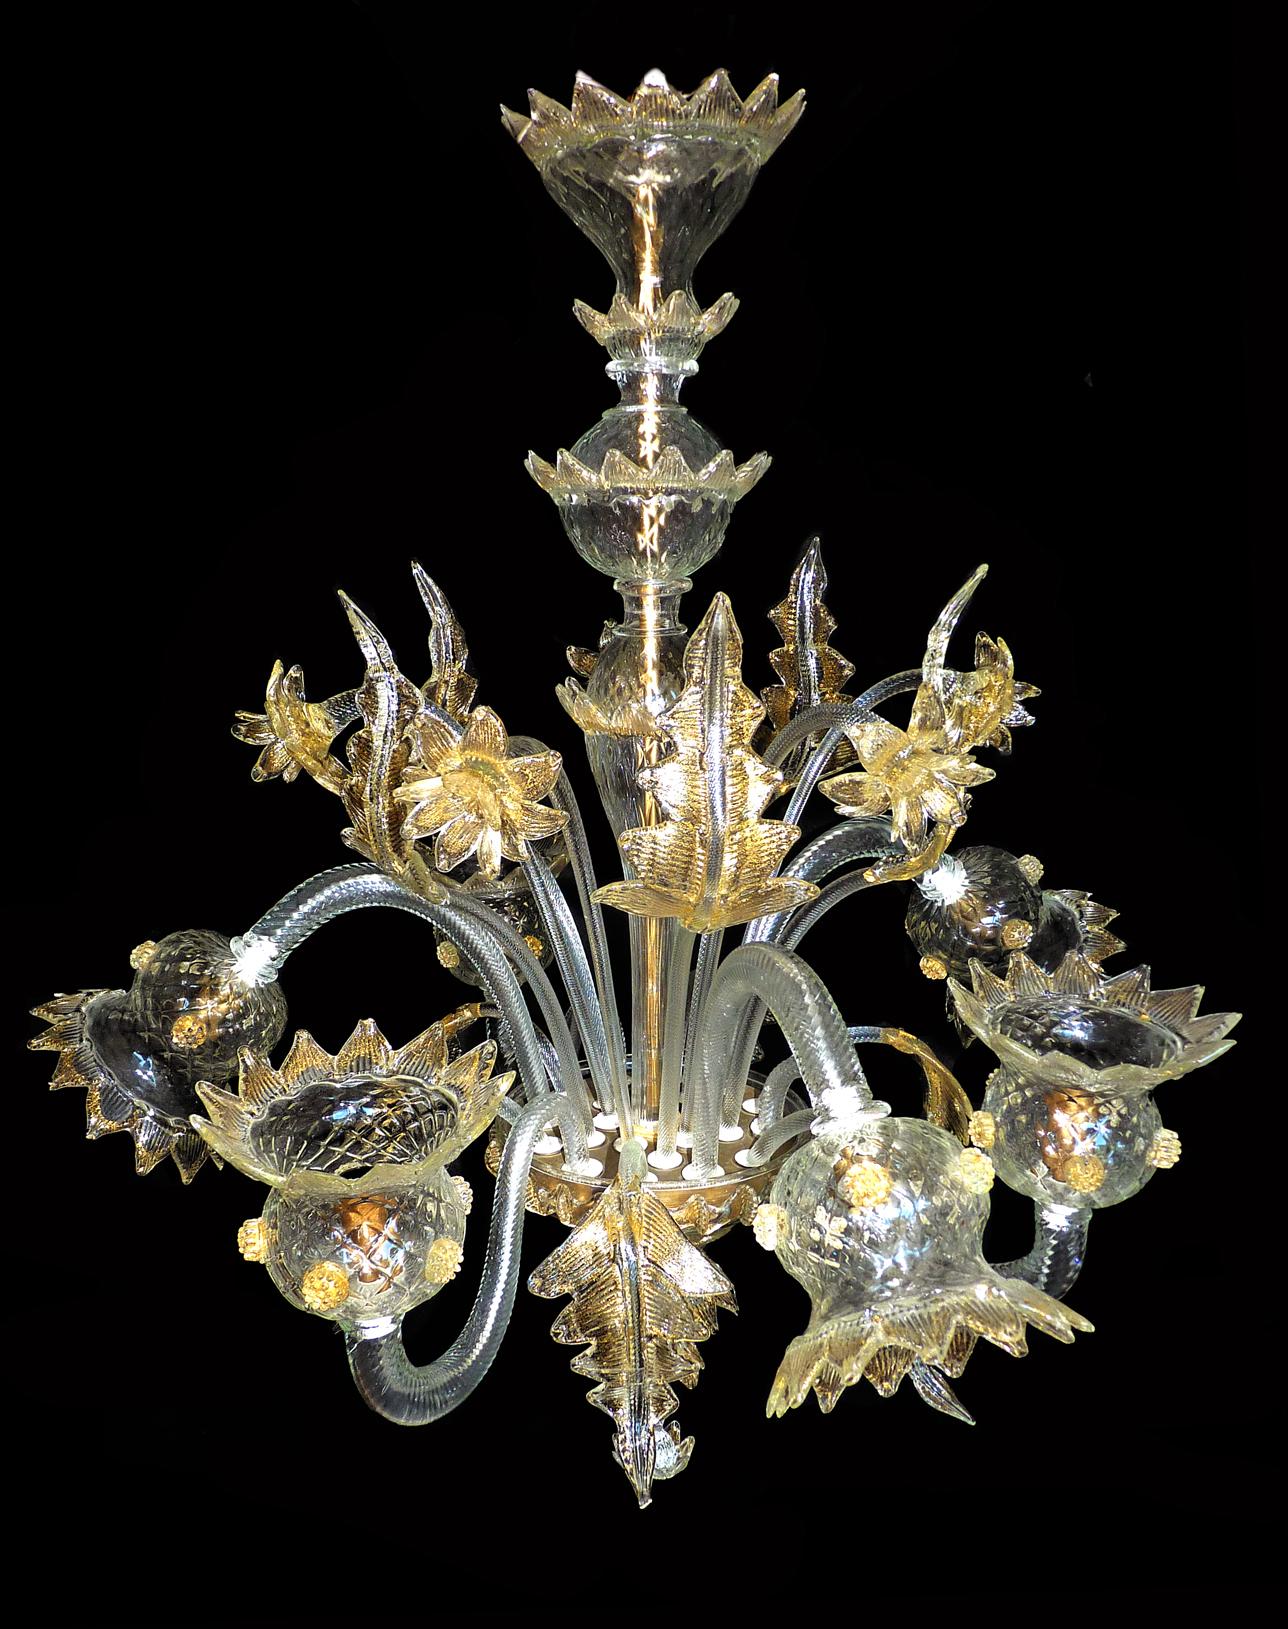 Luxury Fabiano Zanchi Italian Venetian Murano Gold Dusted Amber Glass Chandelier In Excellent Condition For Sale In Coimbra, PT